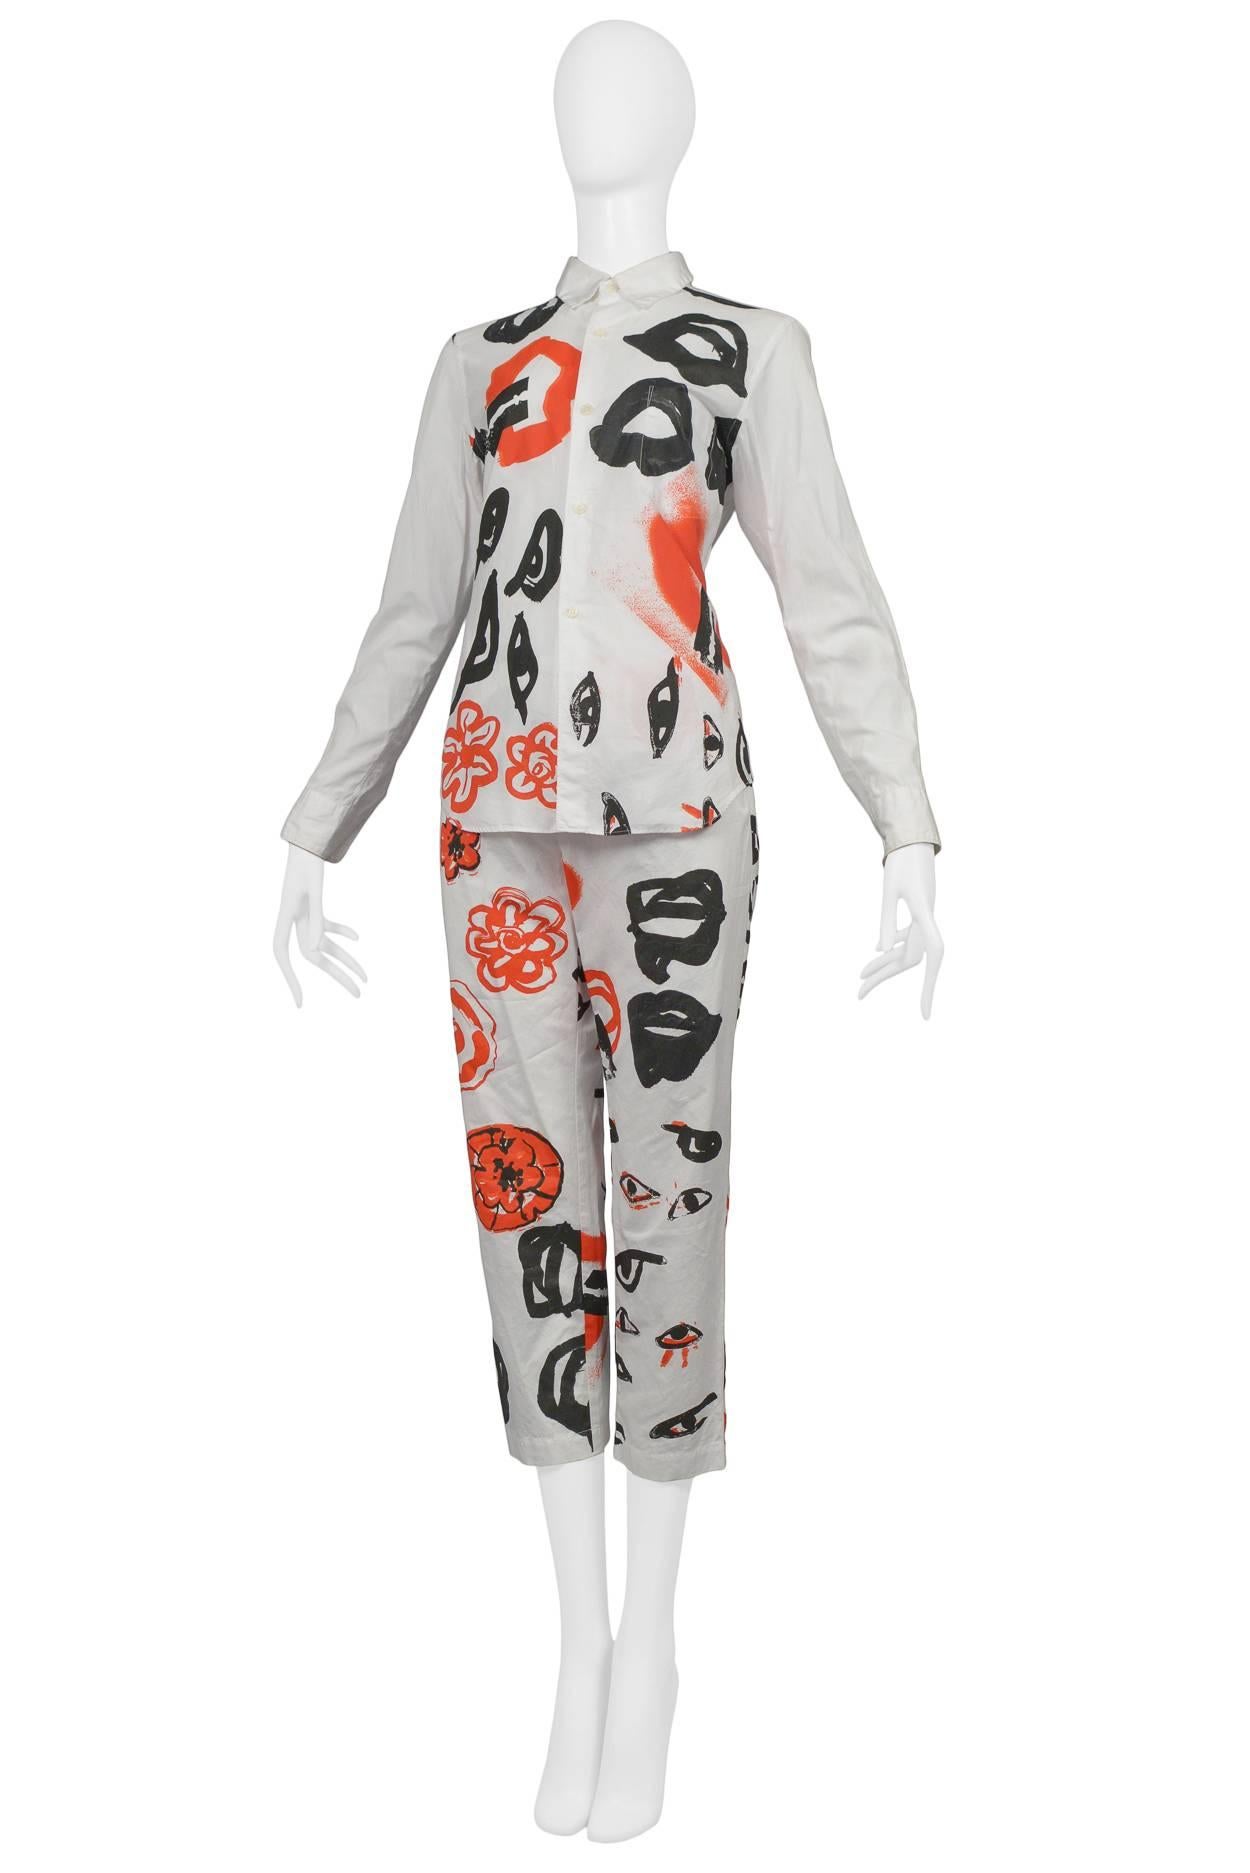 Vintage Comme des Garcons white cotton pant ensemble with eye, razor blade and graphic prints. Collection AW 2000.